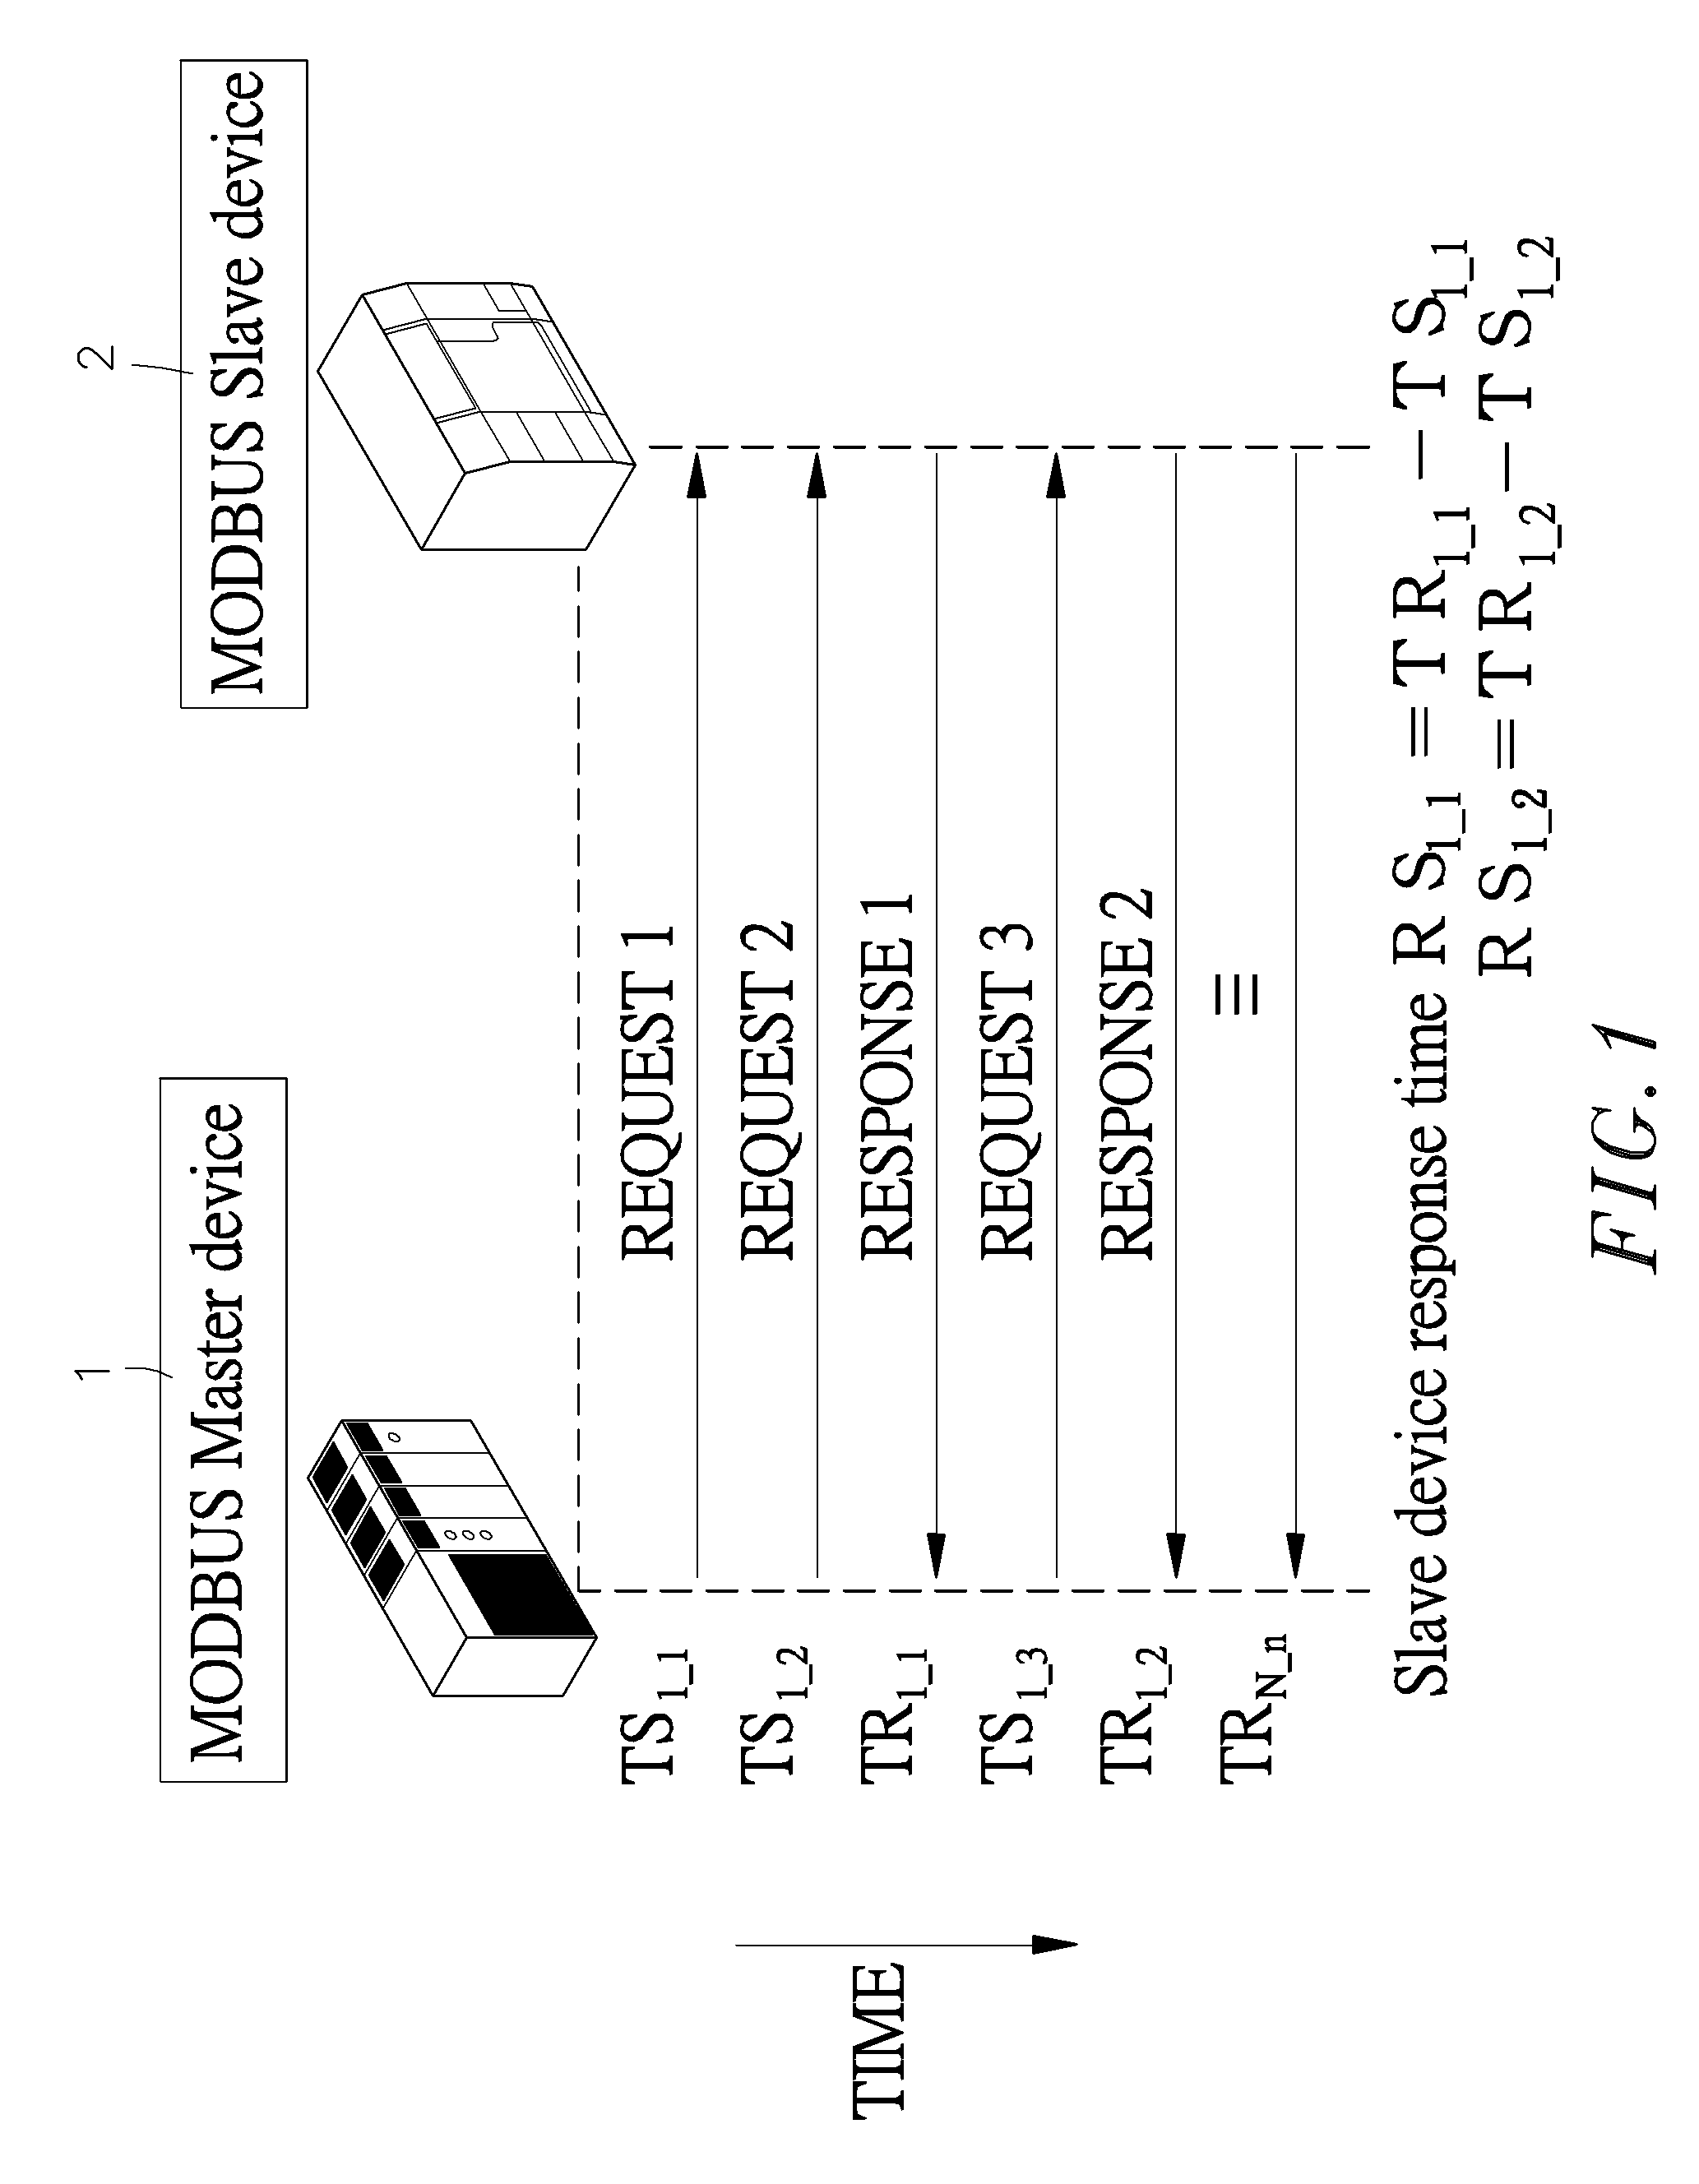 Method for calculating master/slave response time-out under continuous packet format communications protocol